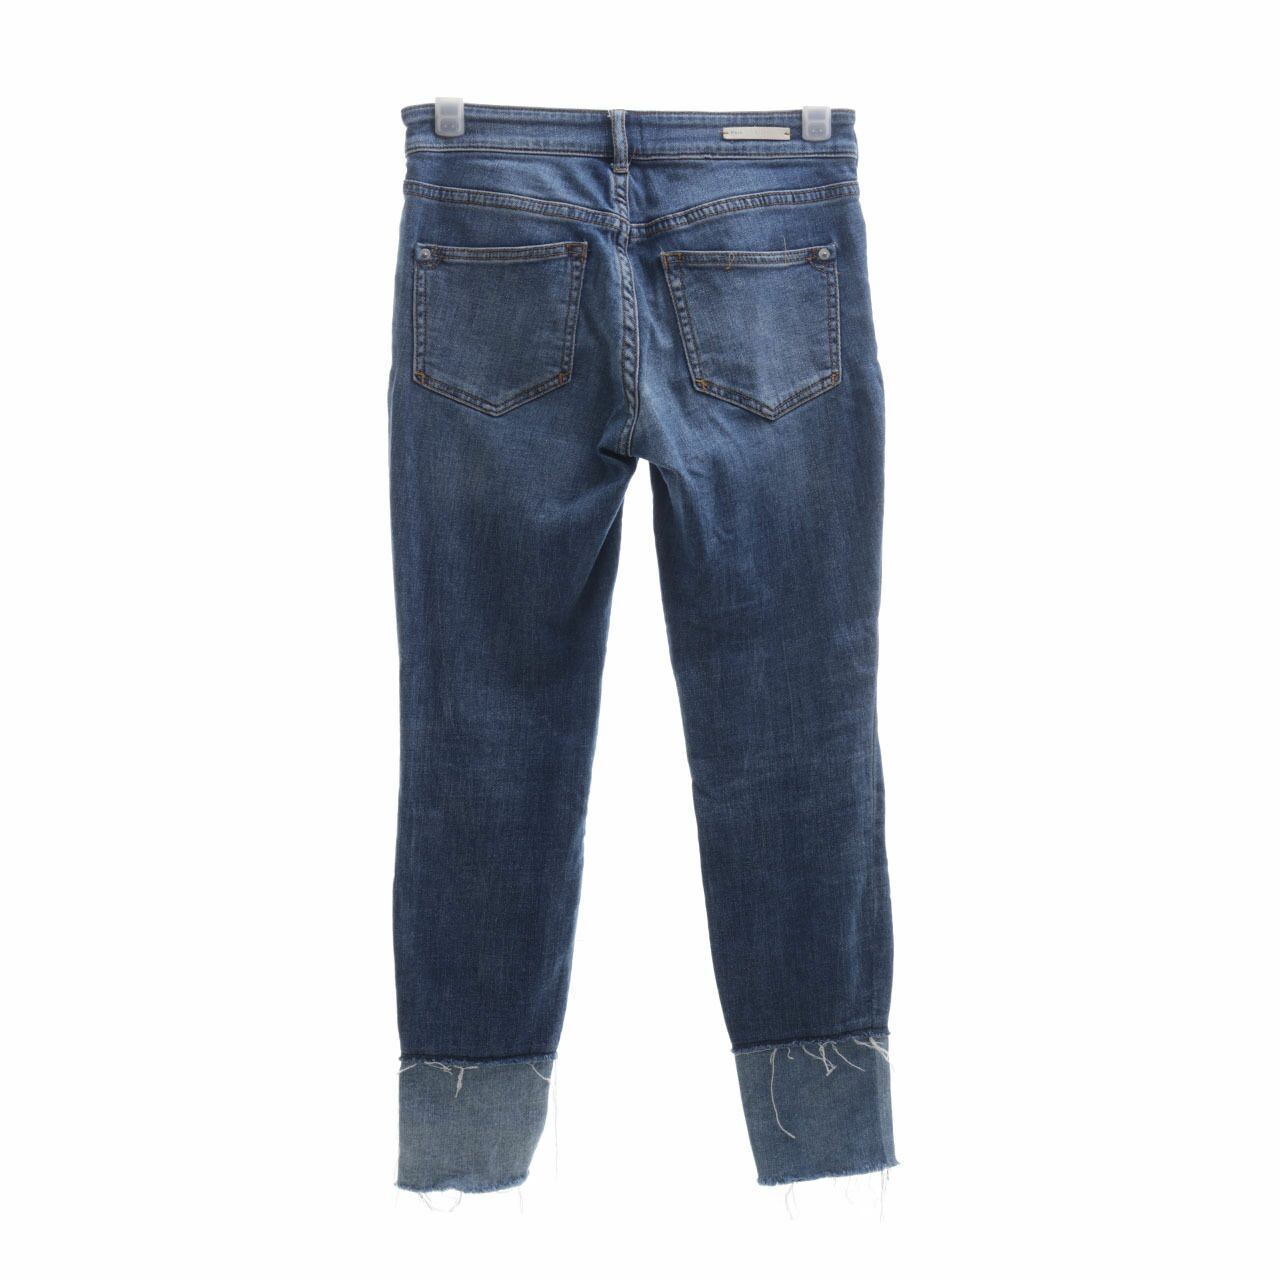 Pilcro And The Letterpress by anthropologie Blue Denim Long Pants